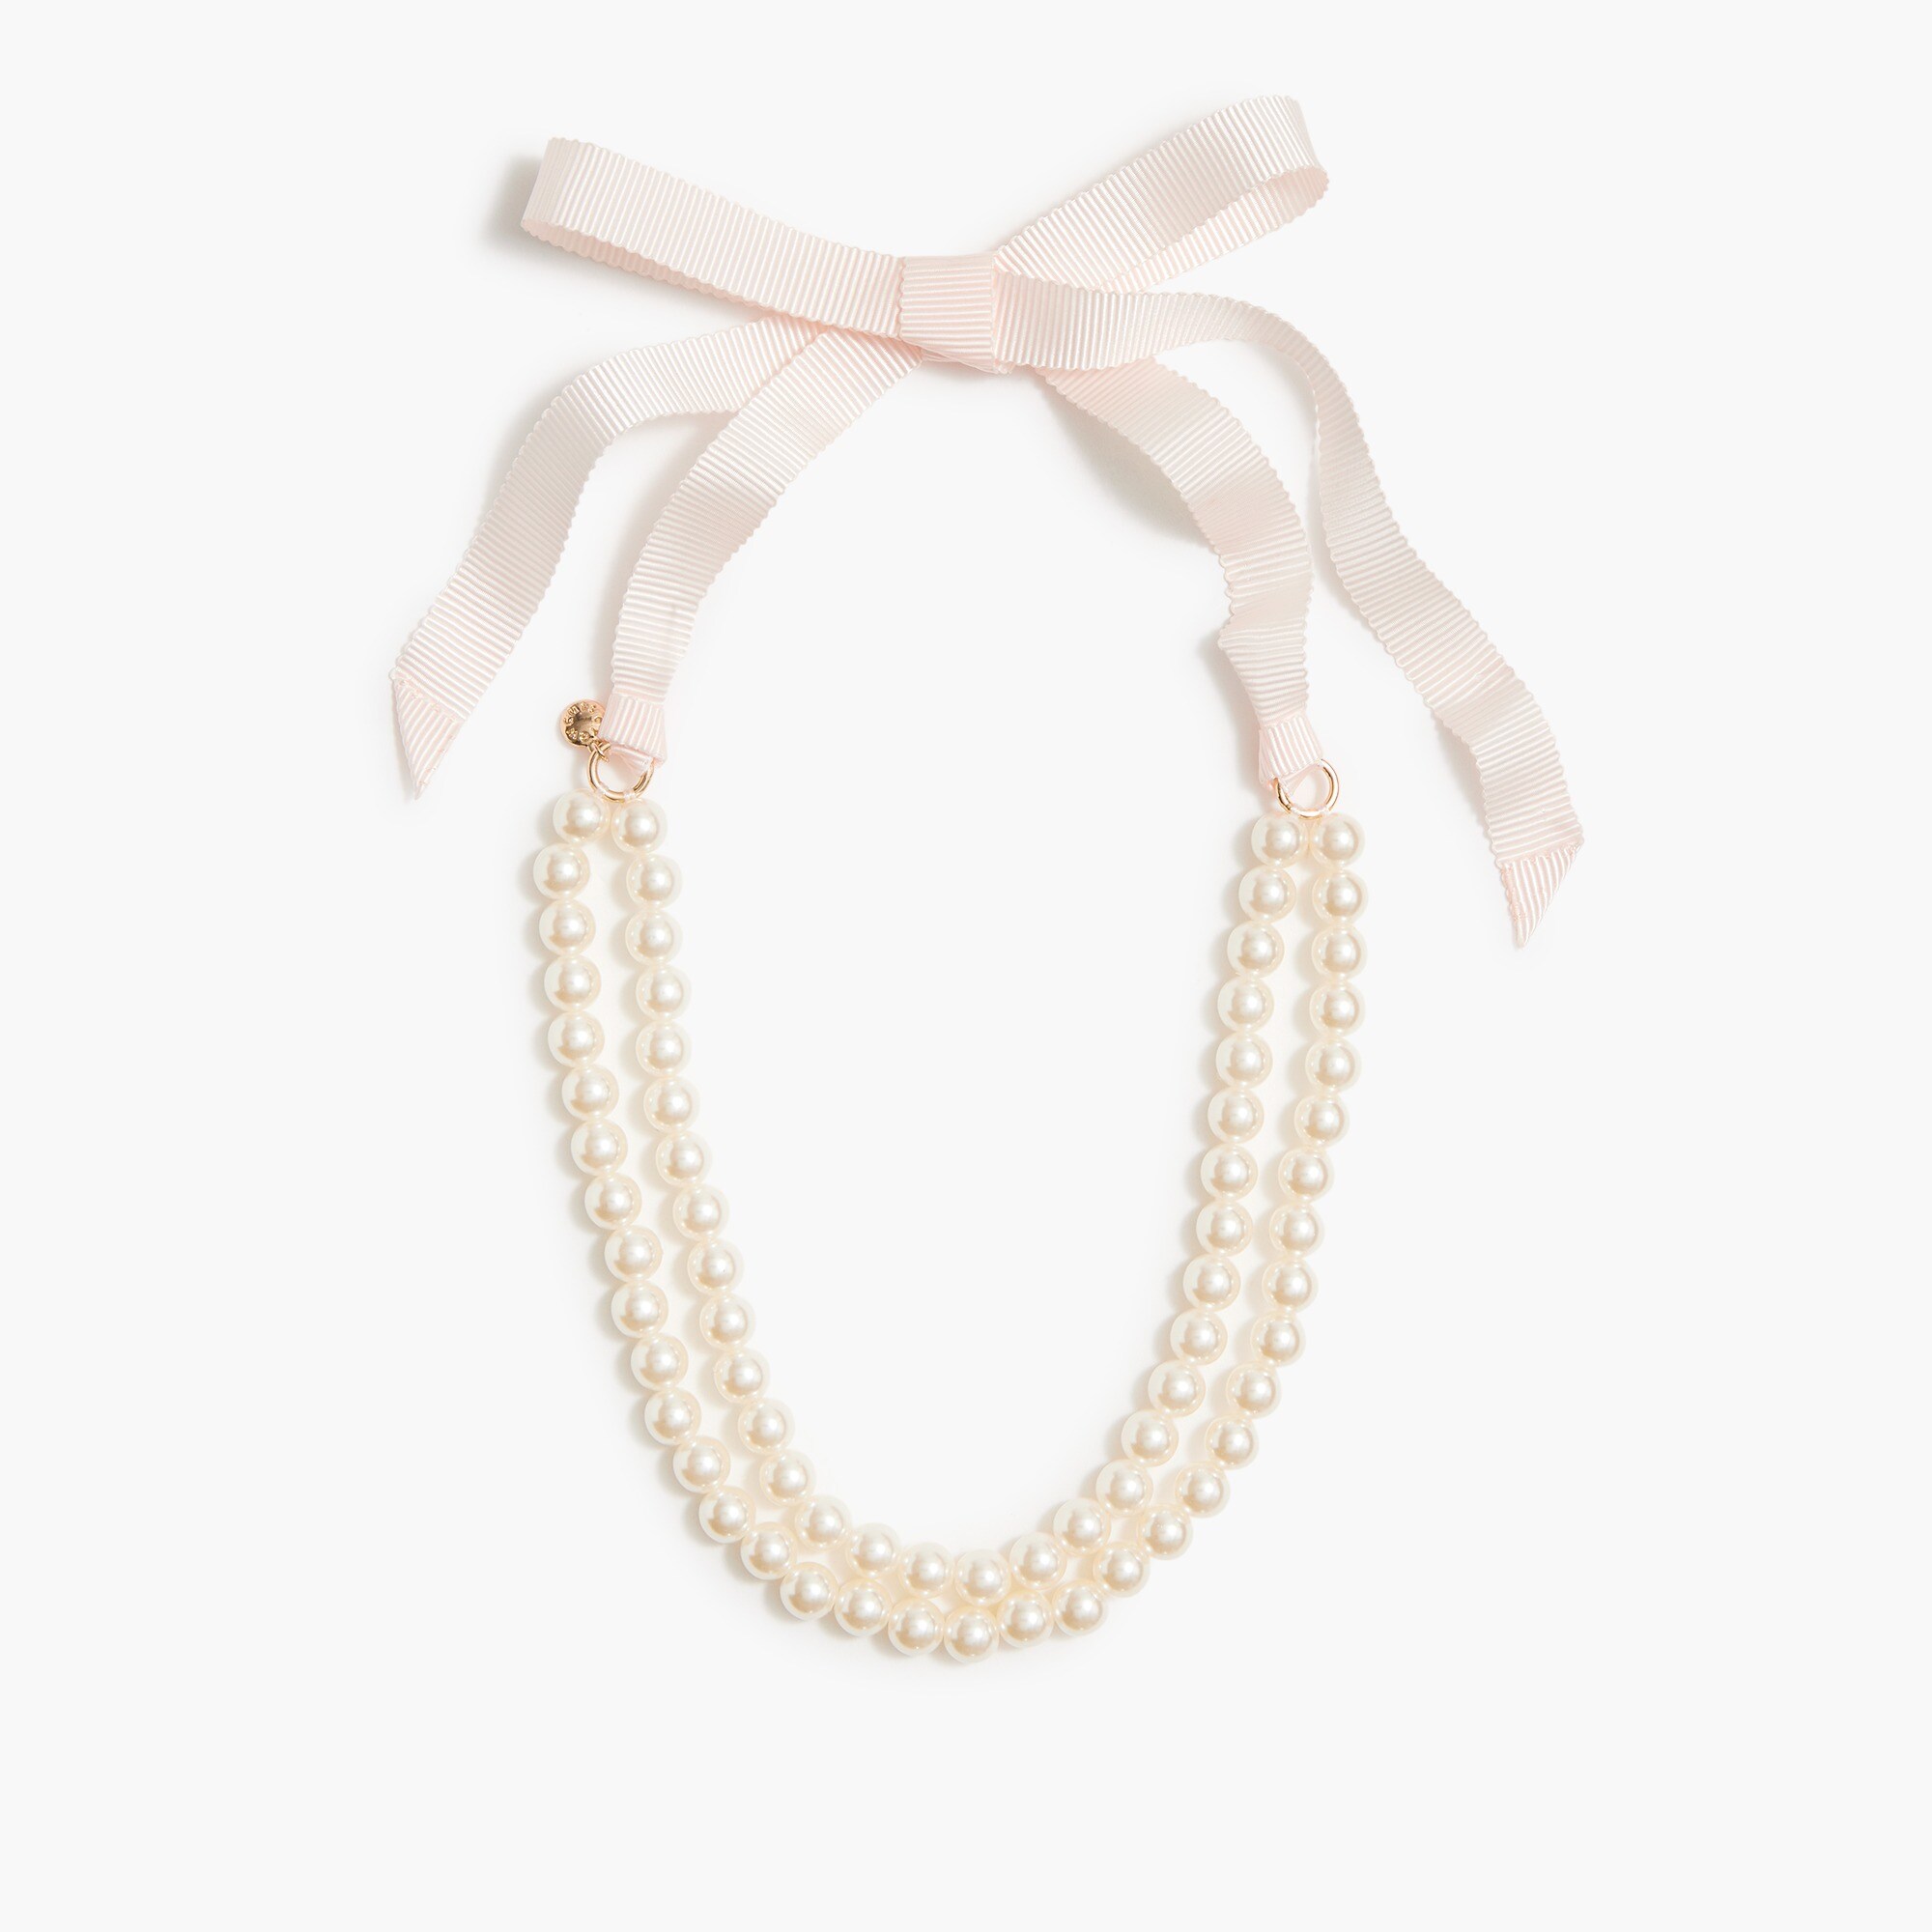  Girls' pearl necklace